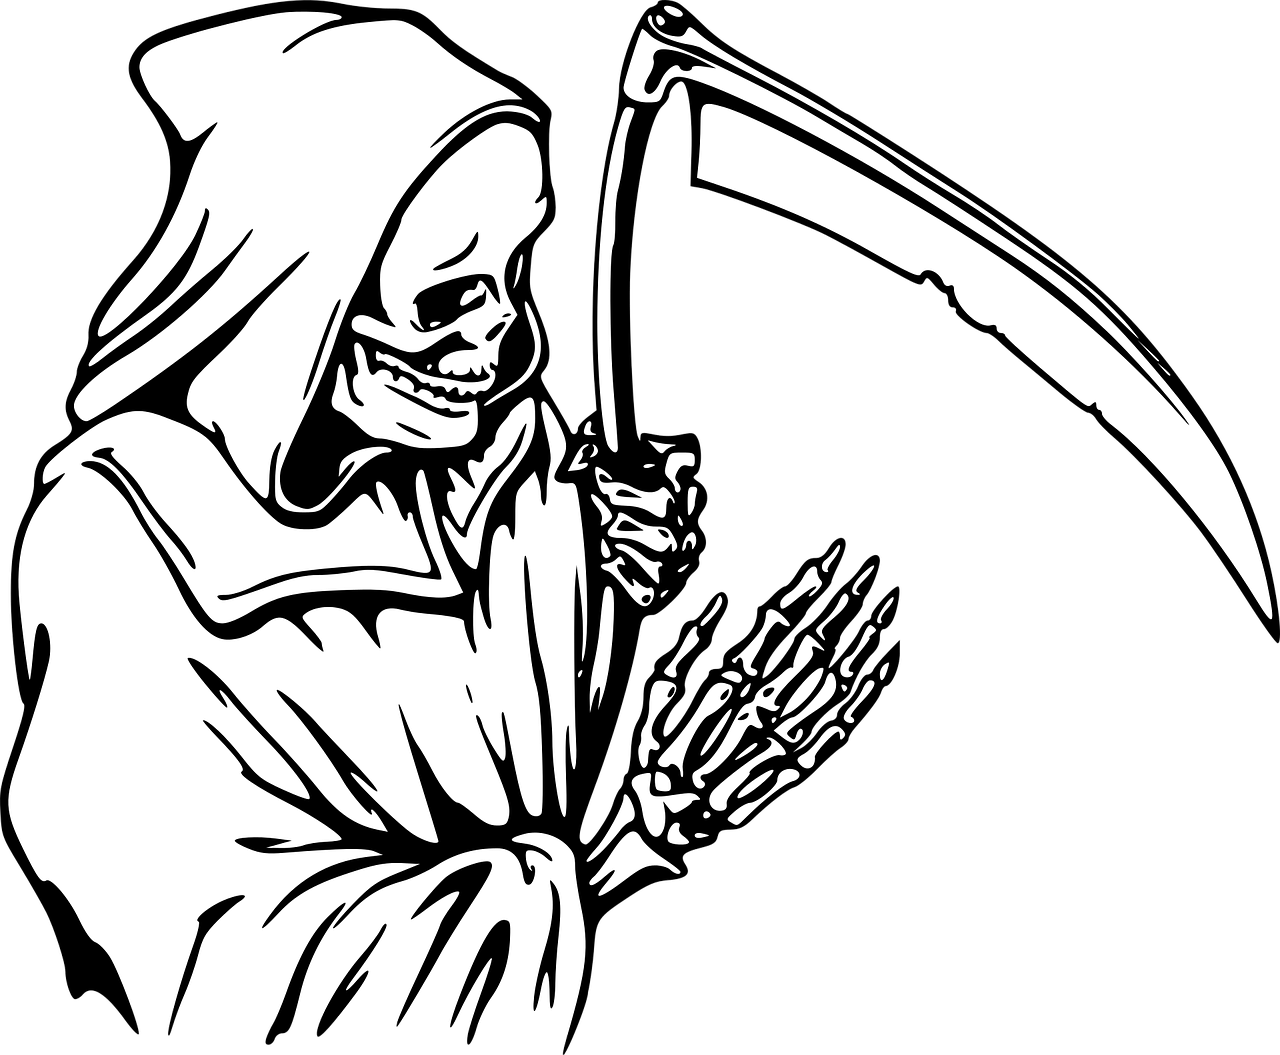 a black and white drawing of a person with a scythe, vector art, pixabay, sots art, the reaper as a scary, character from mortal kombat, death dreaming about death, transparent background